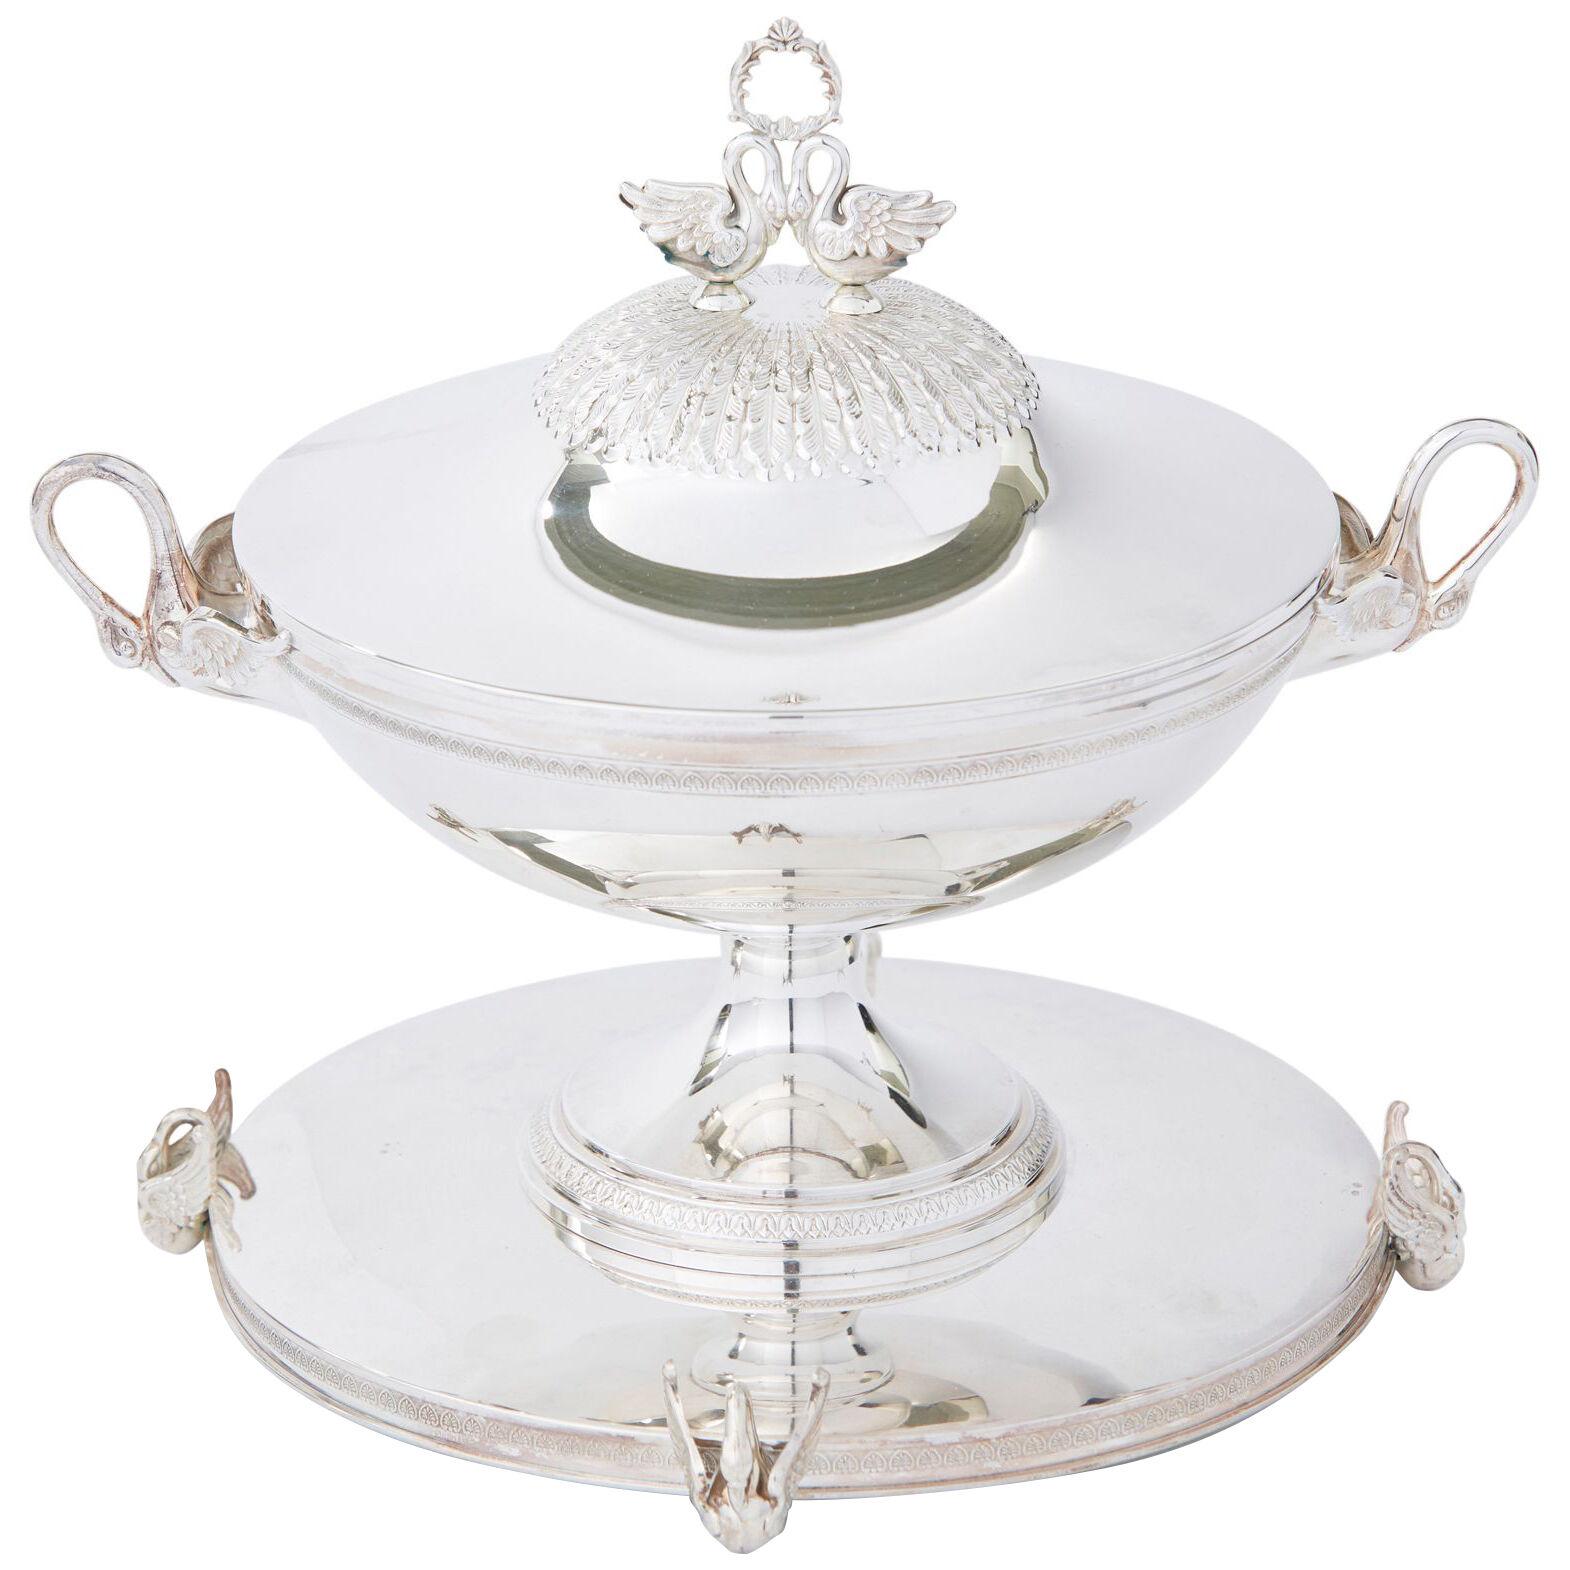 20th Century Silver Plated Covered Tureen